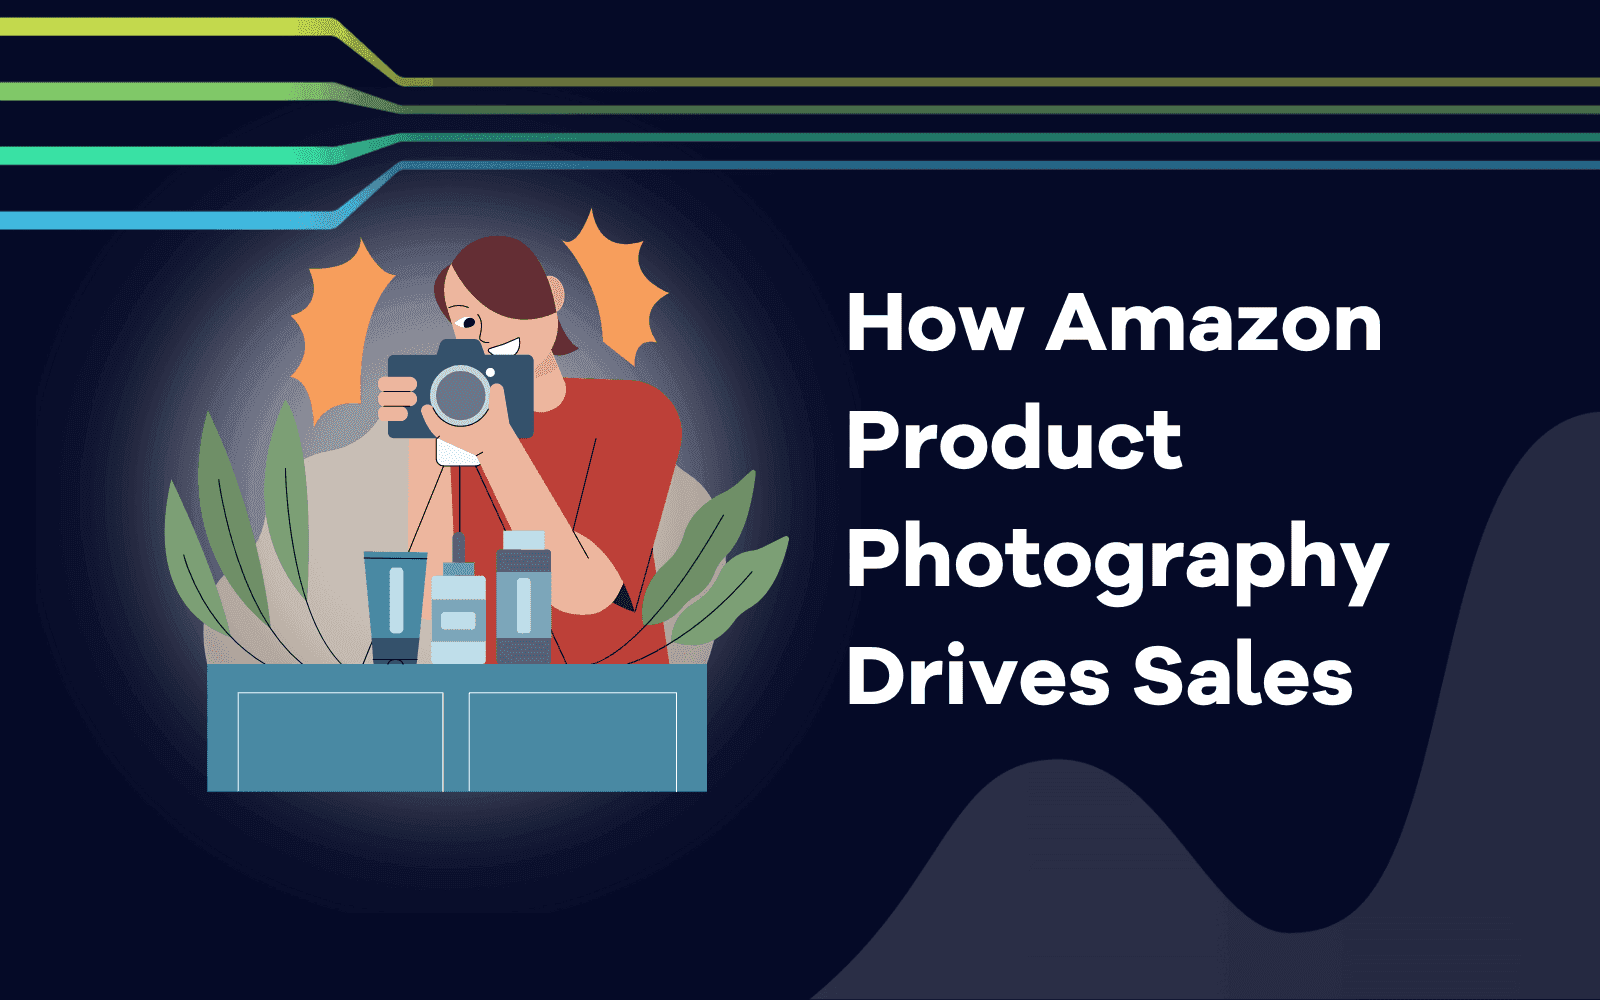 How Amazon Product Photography Drives Sales